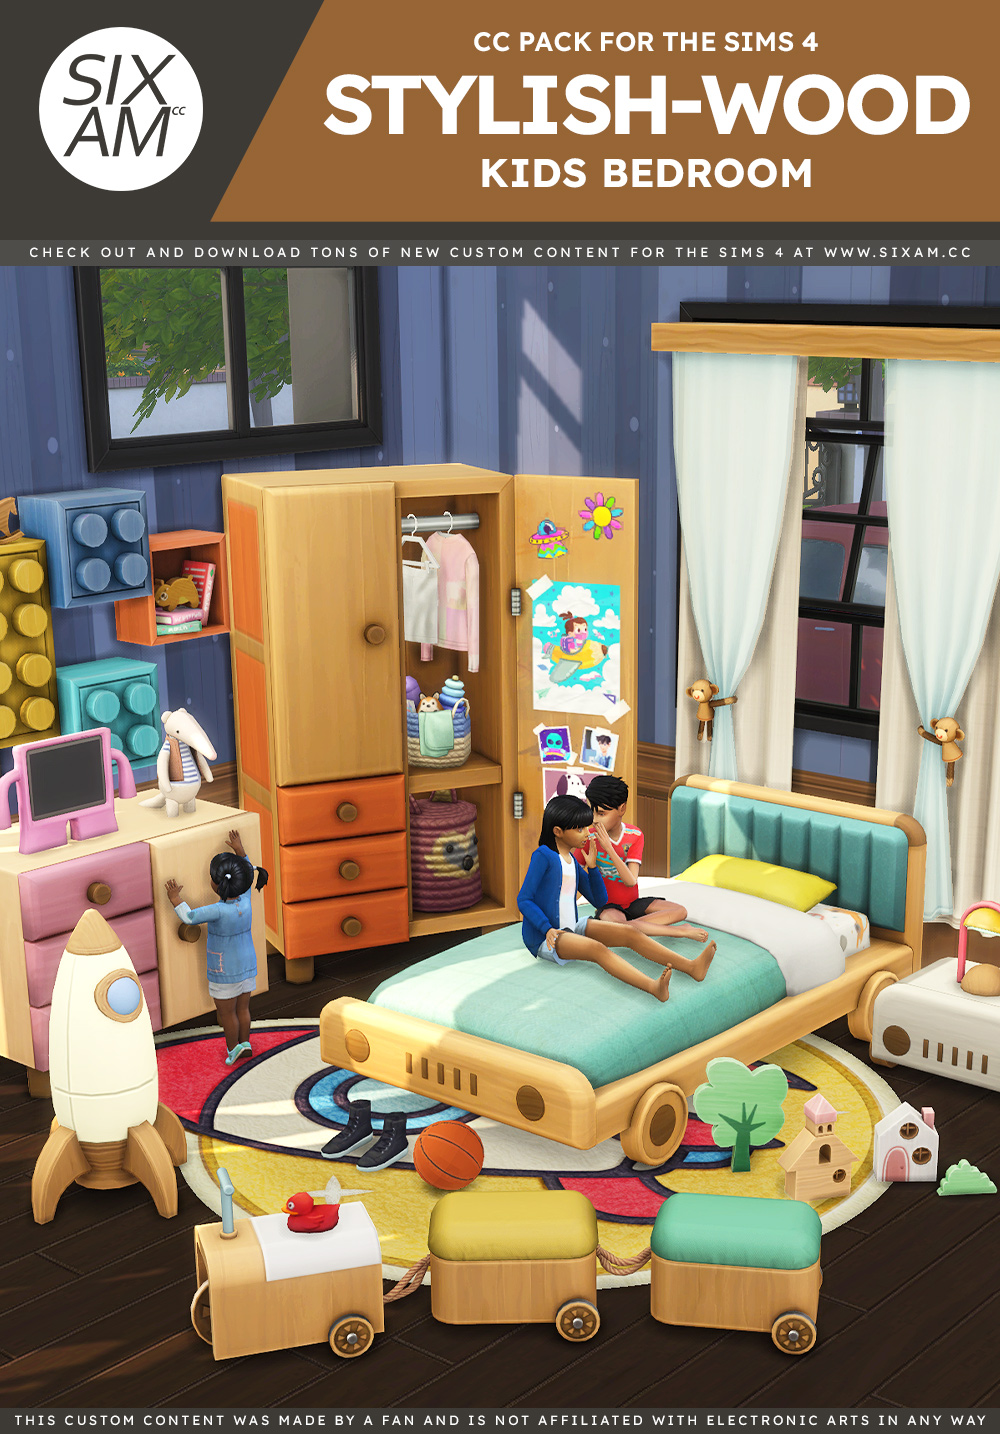 Stylish-Wood Kids Bedroom (CC Pack for The Sims 4)